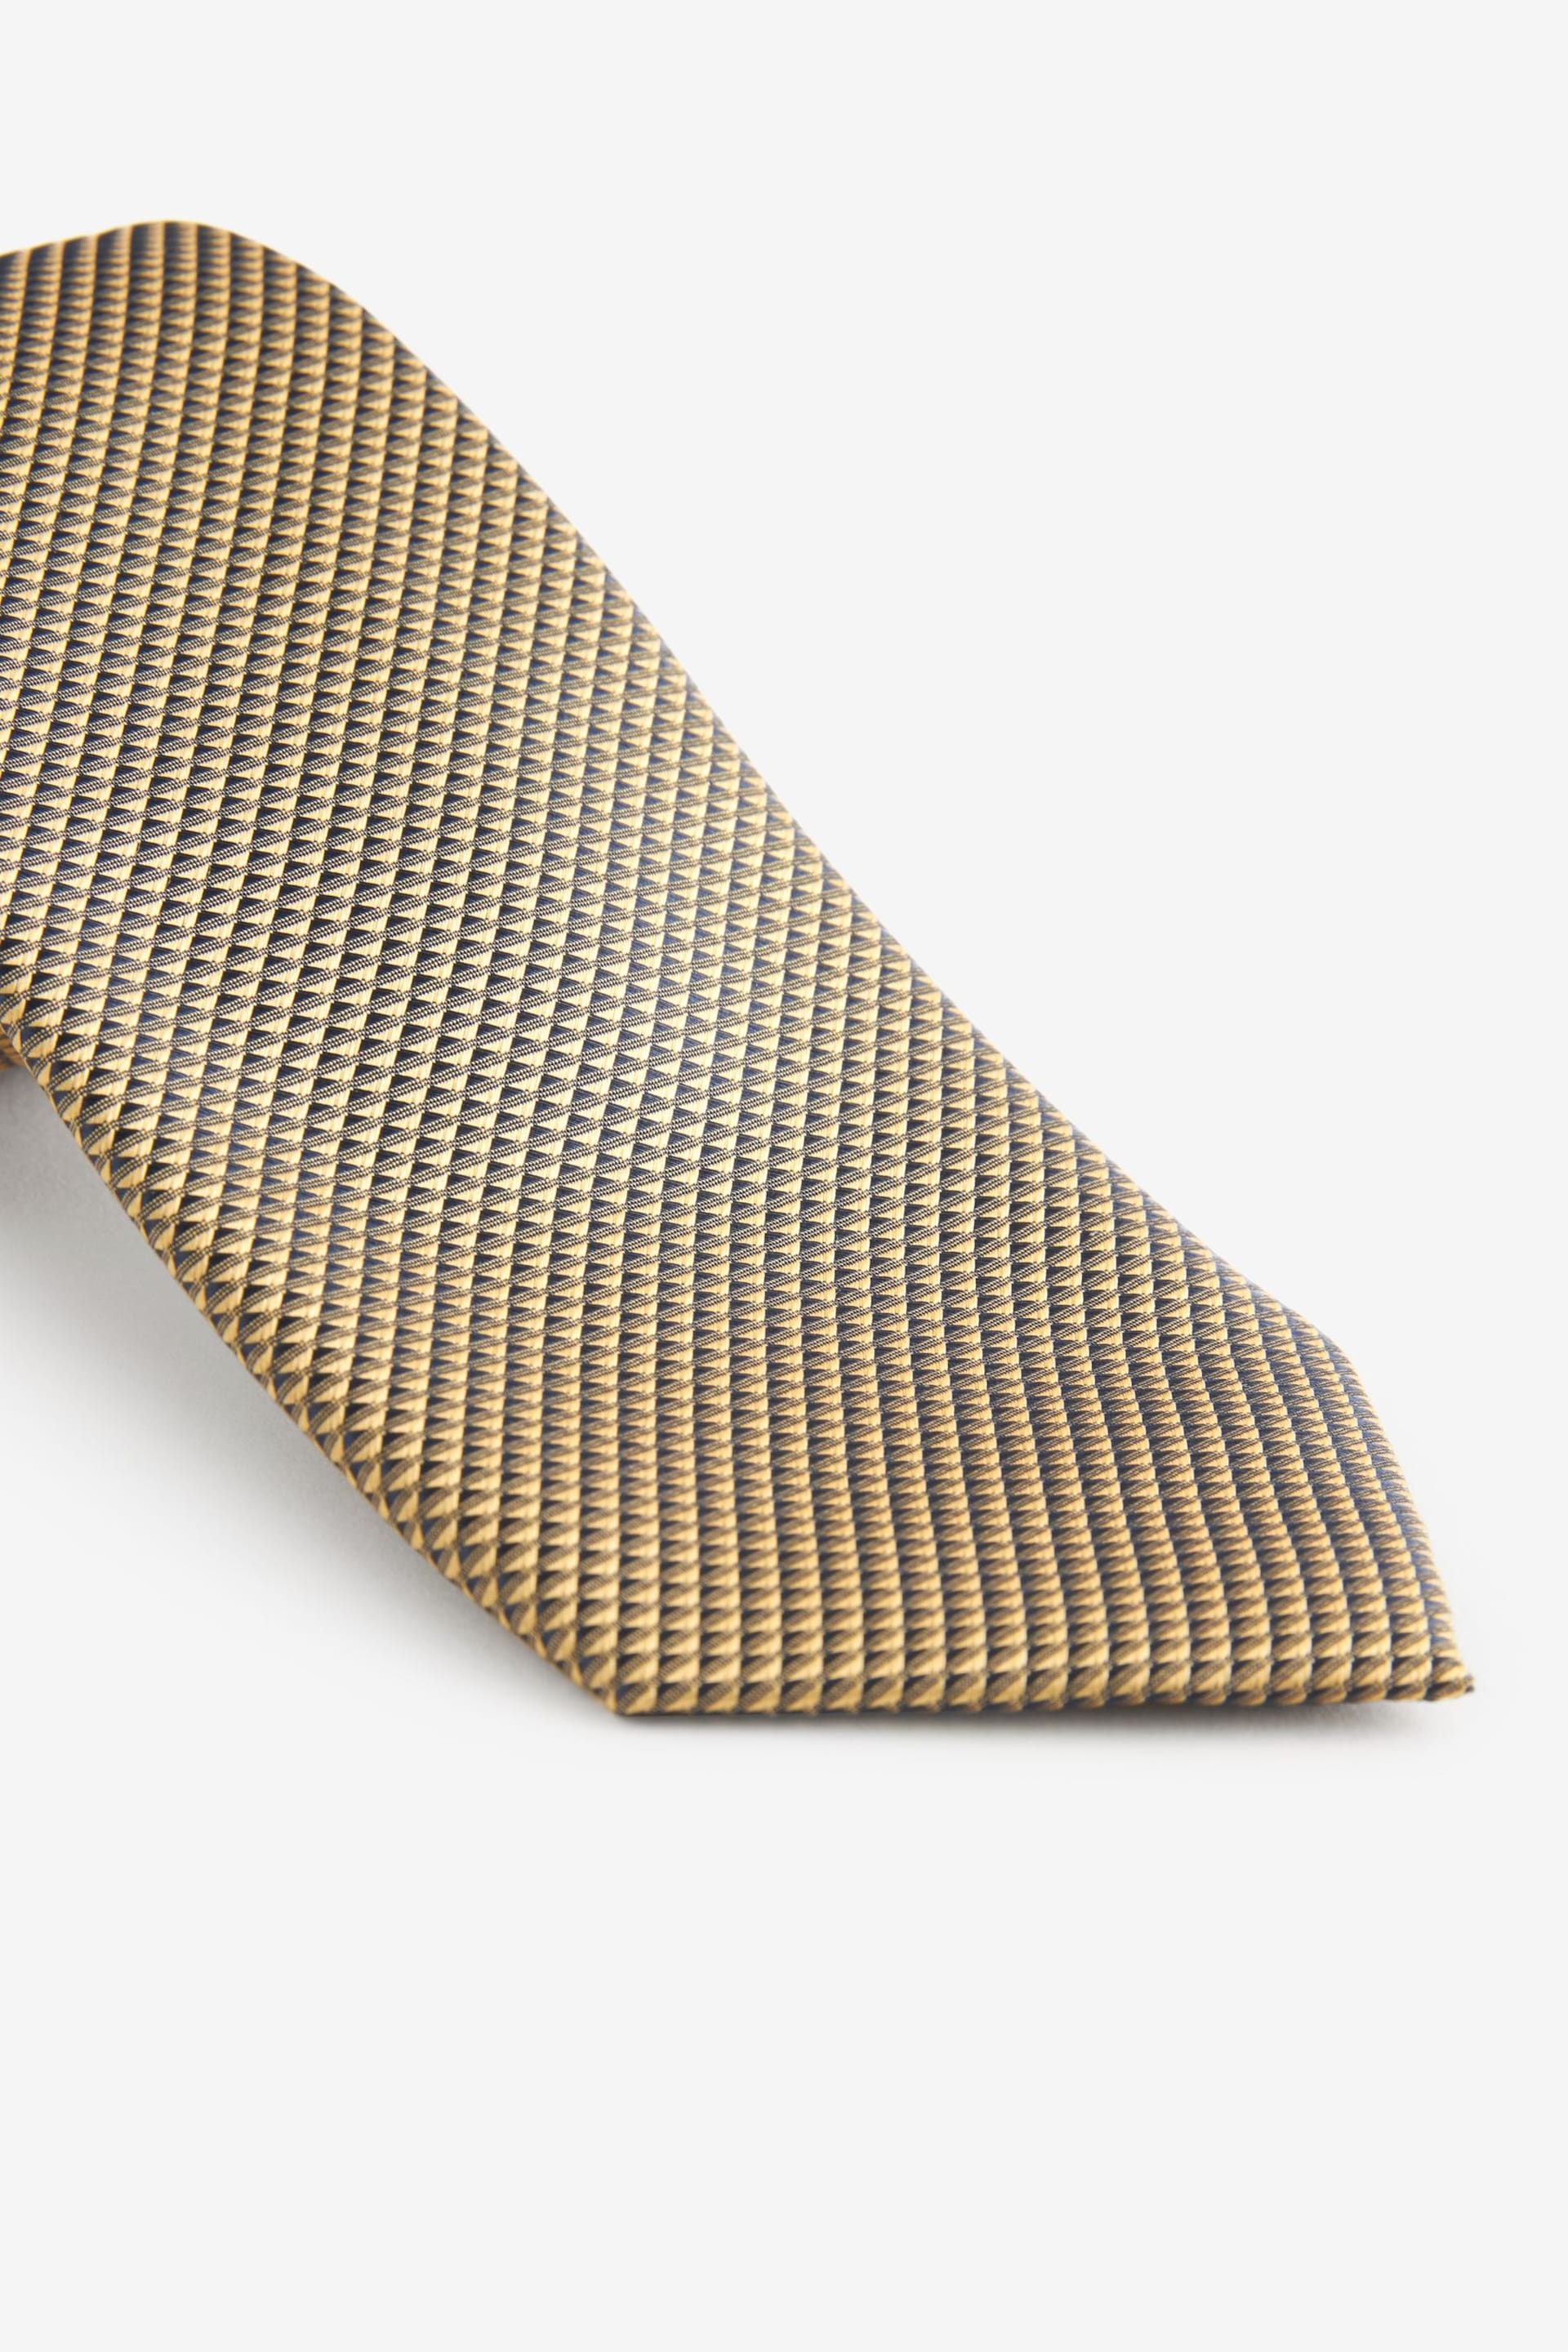 Yellow Gold Textured Tie - Image 2 of 3